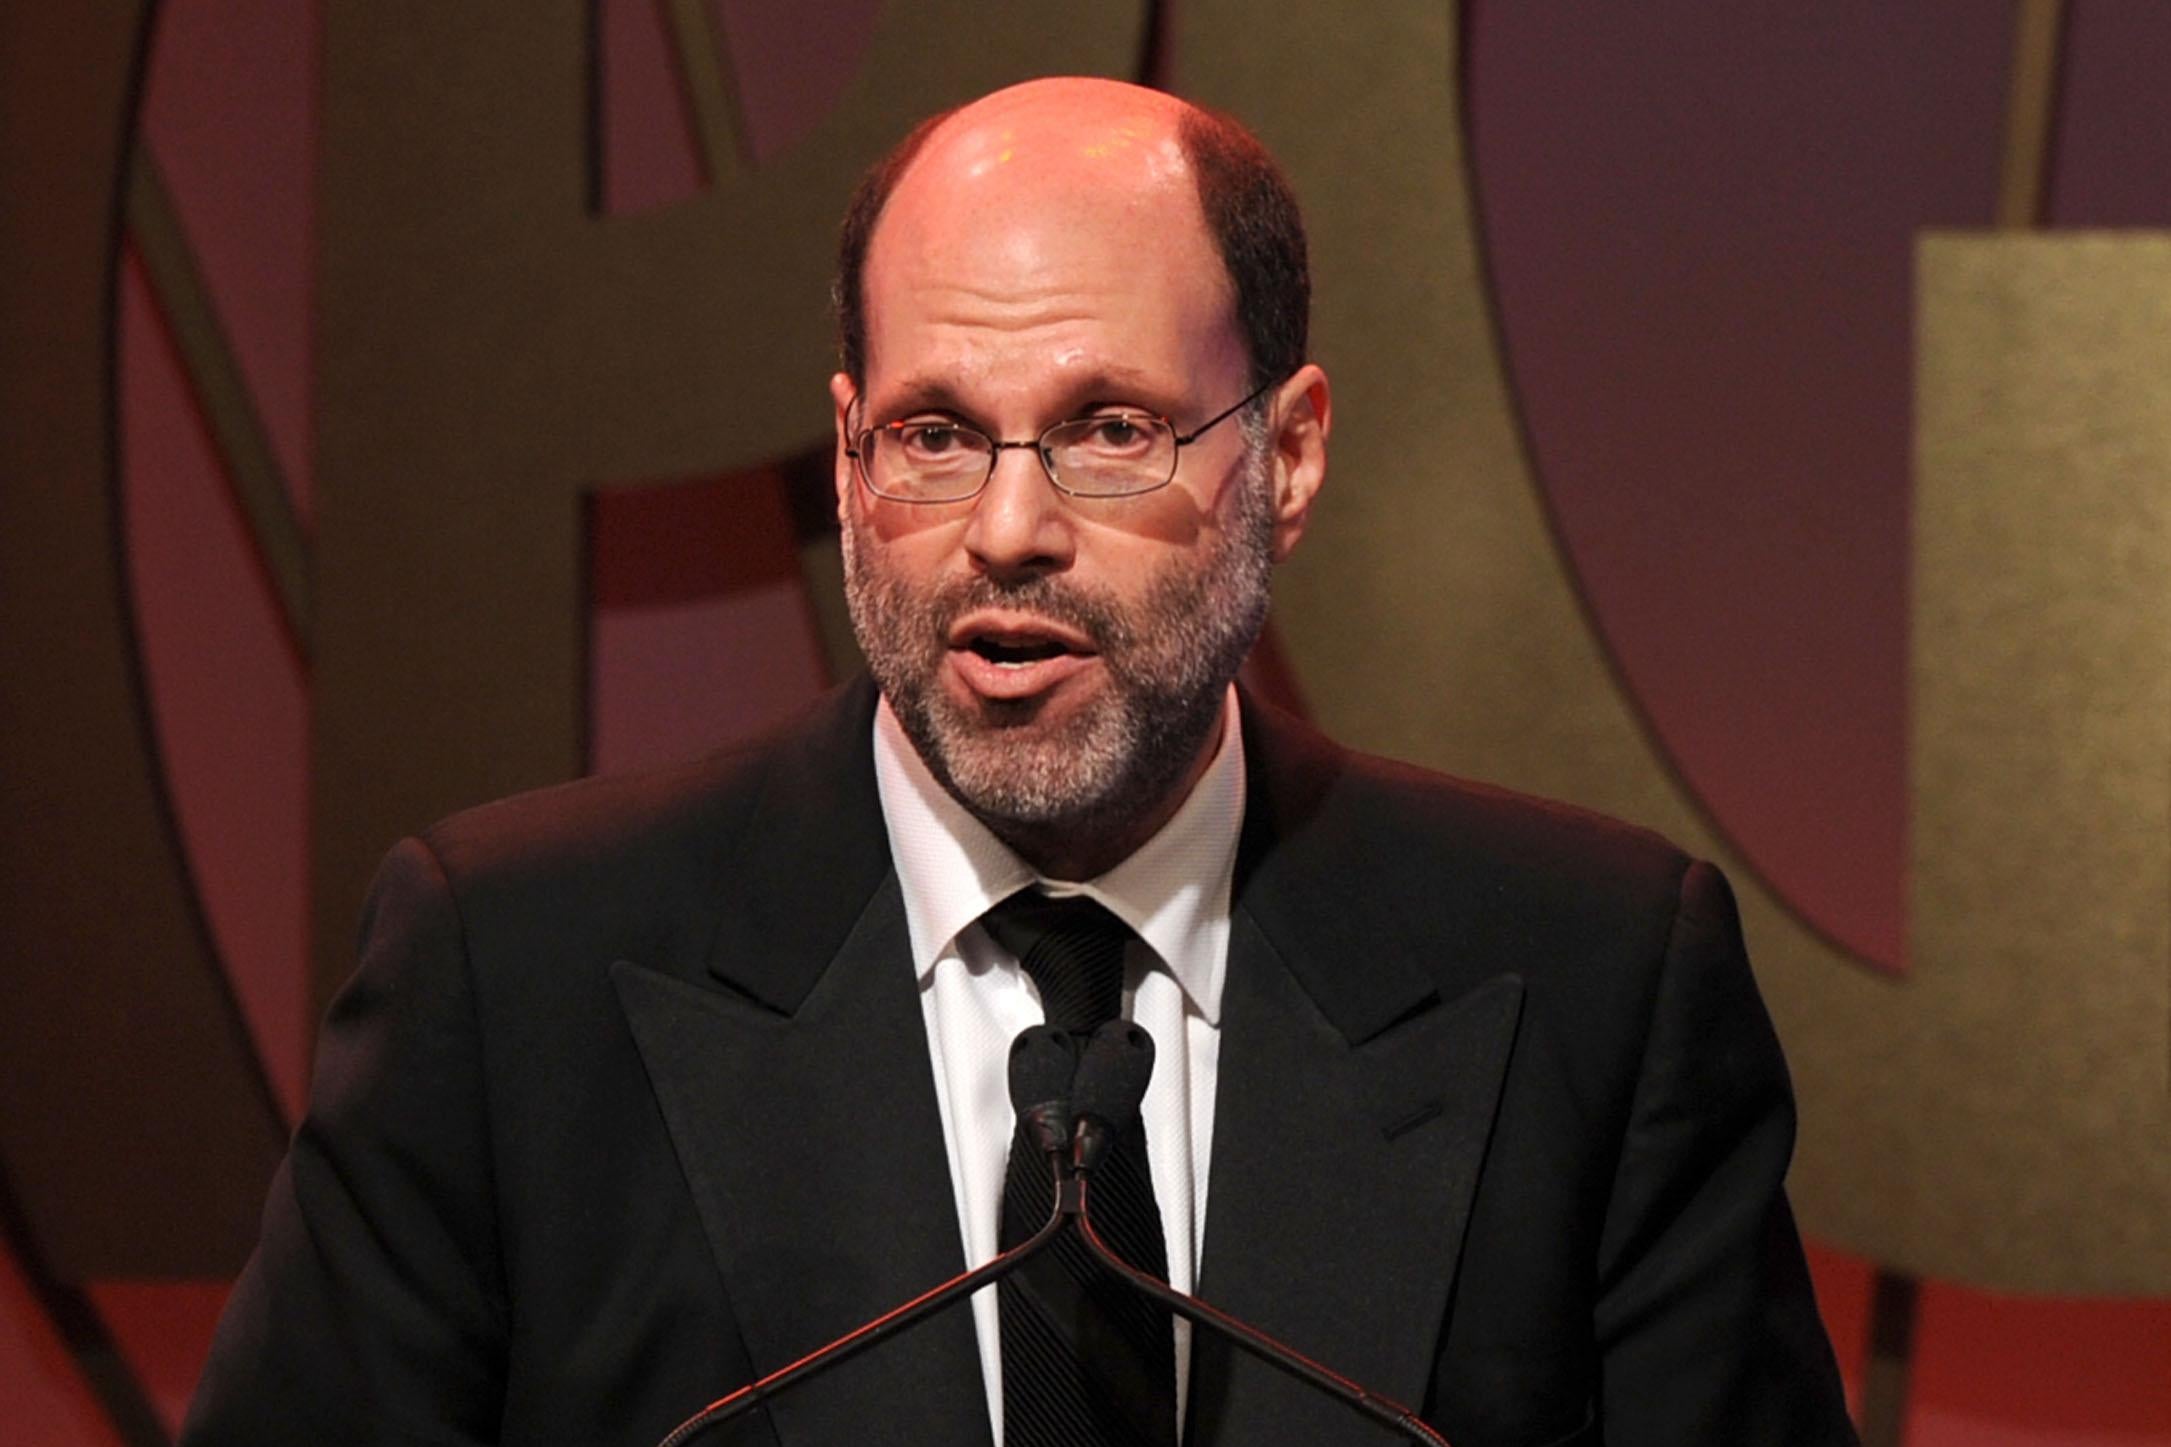 Scott Rudin in a black suit and tie.